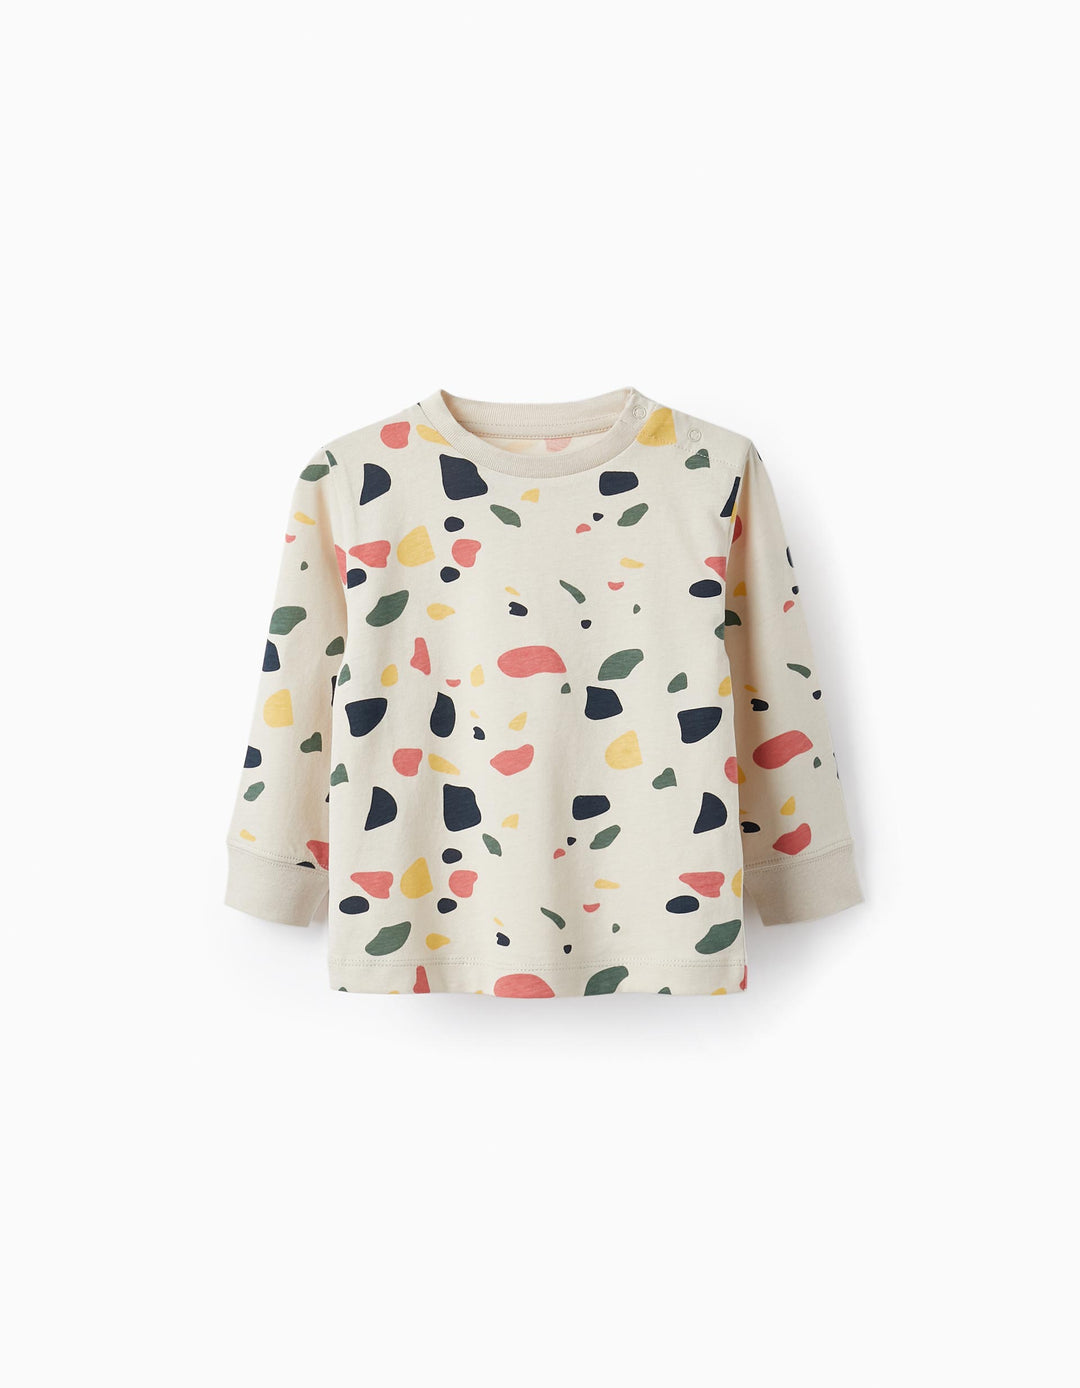 Cotton T-shirt with Colored Shapes for Baby Boys, Beige